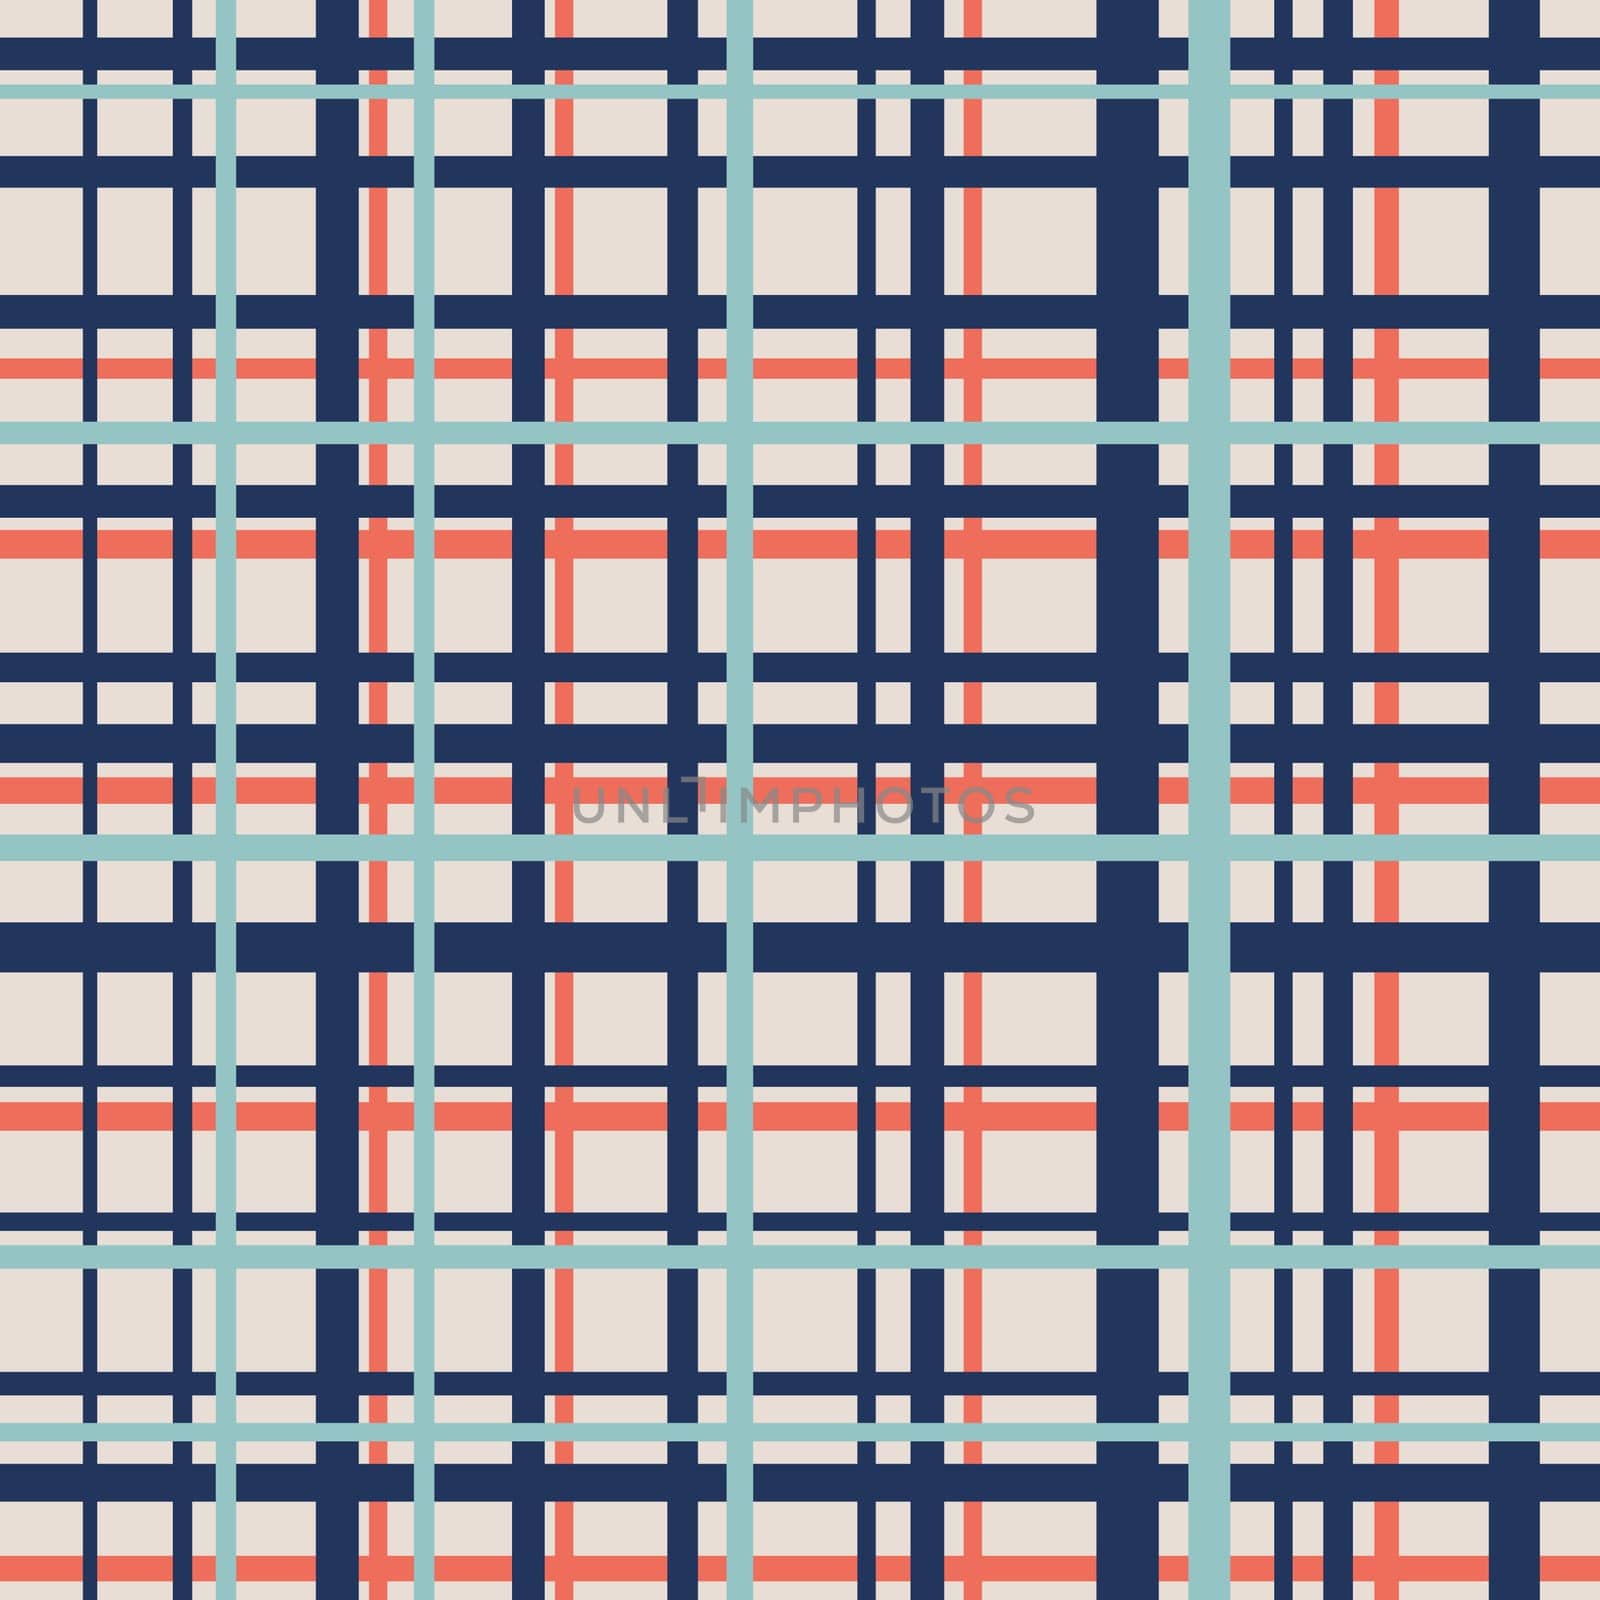 Hand drawn seamless pattern of plaid tartan checkered textile print in blue orange beige. Checks squares lines in abstract geometric modern colorful design. For wallpaper classic nursery decor. by Lagmar